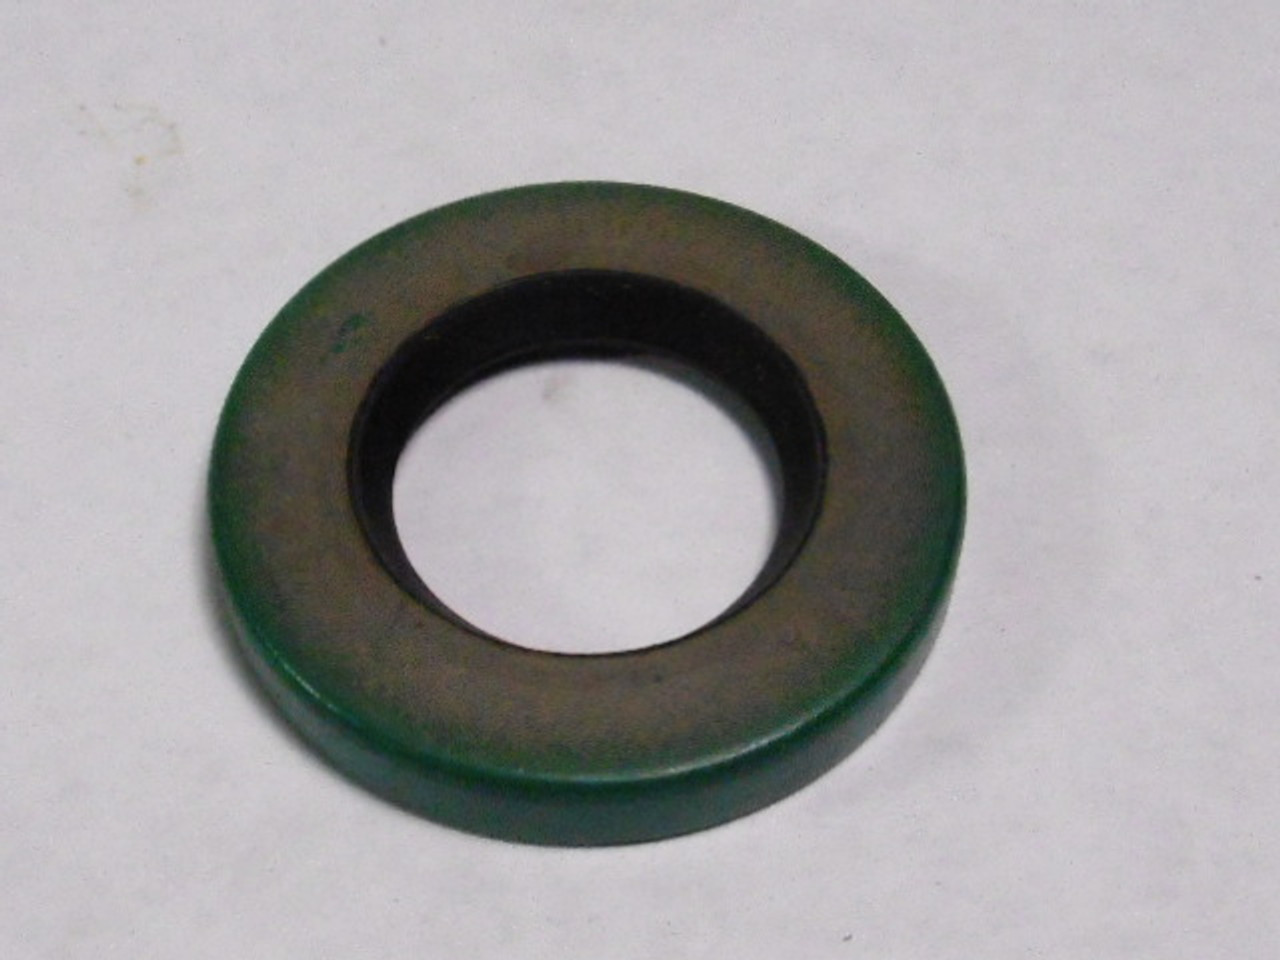 Chicago Rawhide 9997 Oil Seal 26x44x6mm ! NEW !